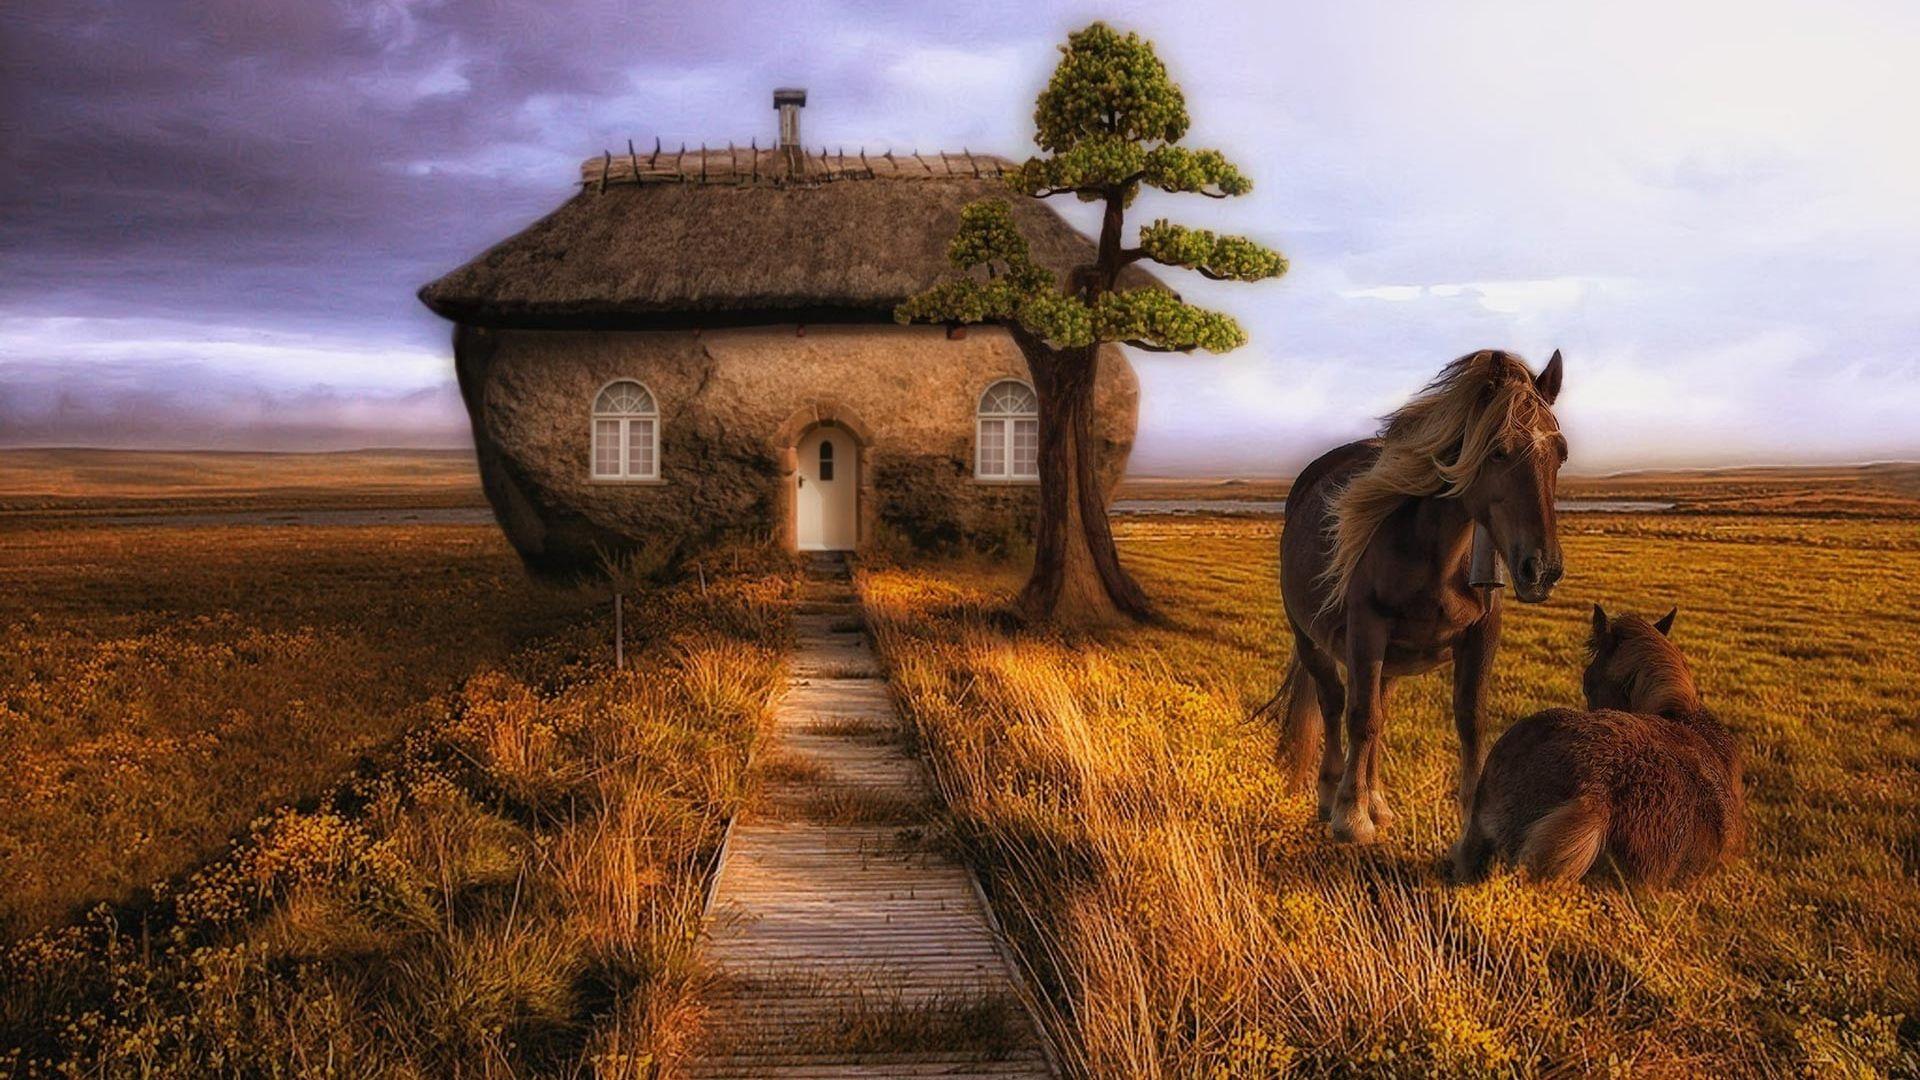 Download Wallpaper 1920x1080 horse, couple, building, trees, grass